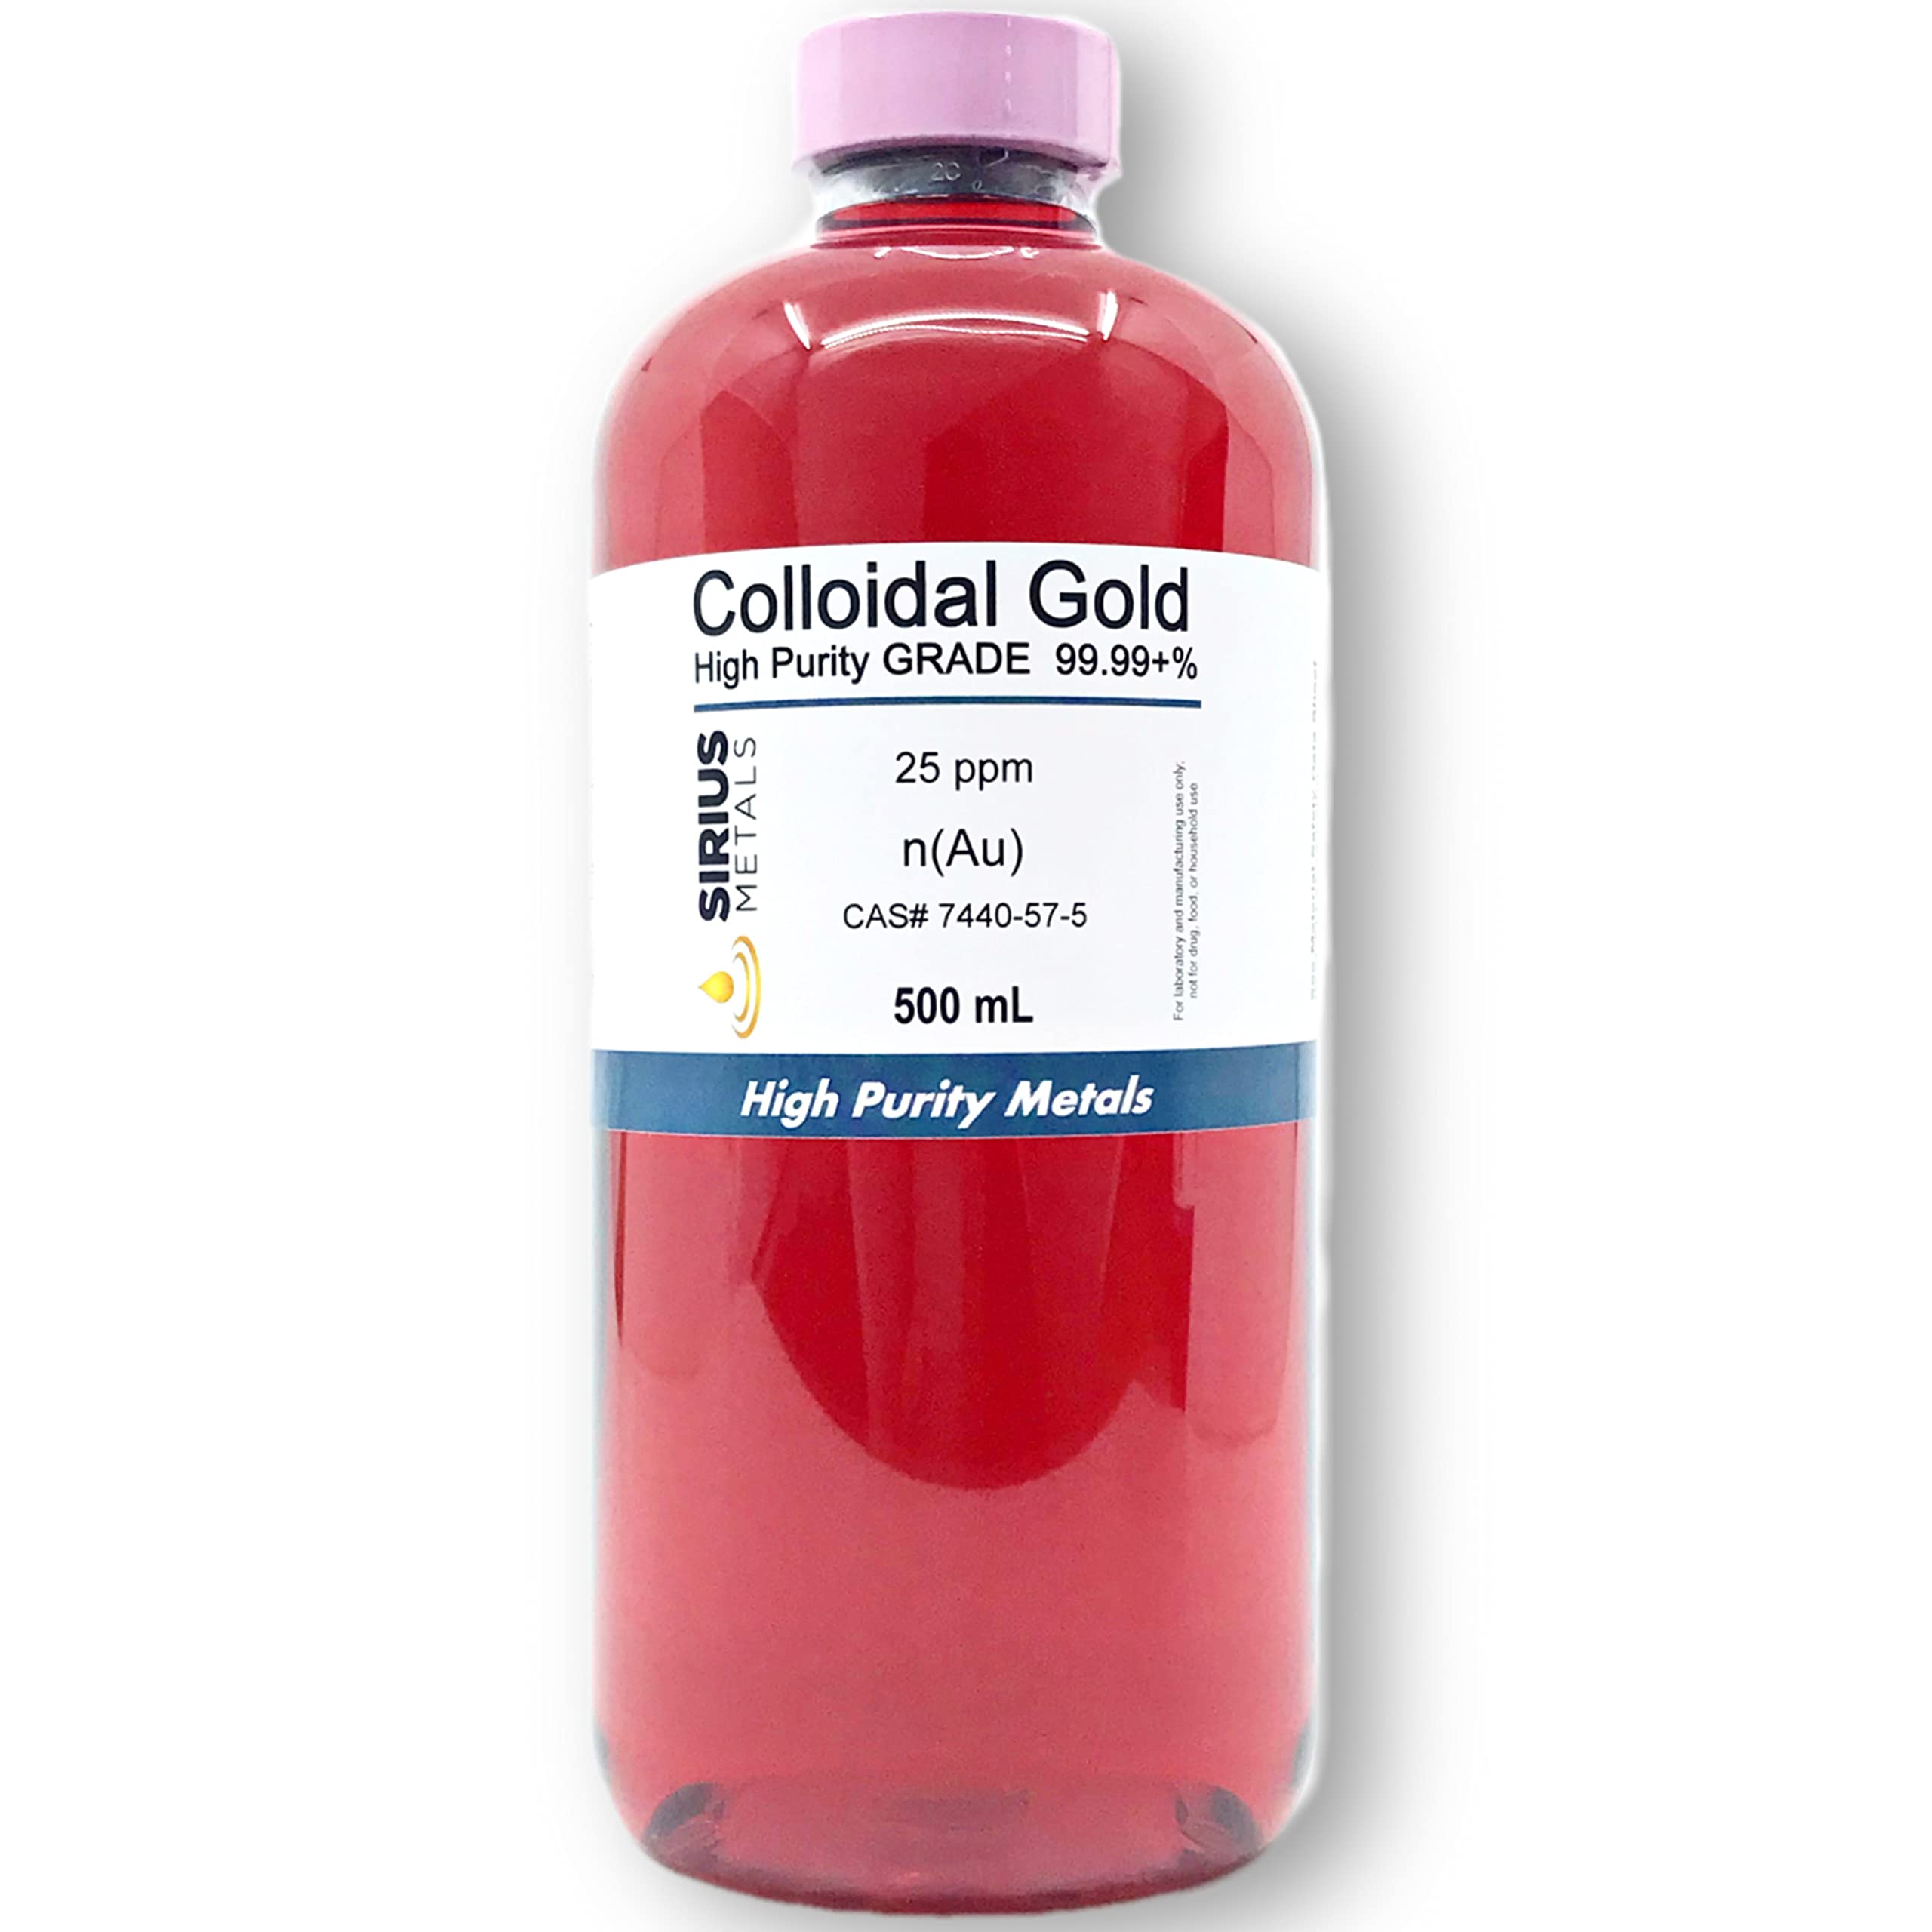 True Colloidal Gold – 25 ppm - 99.99+% Purity - 500 mL (16.9 Fl Oz) in Glass Bottle - Made in USA